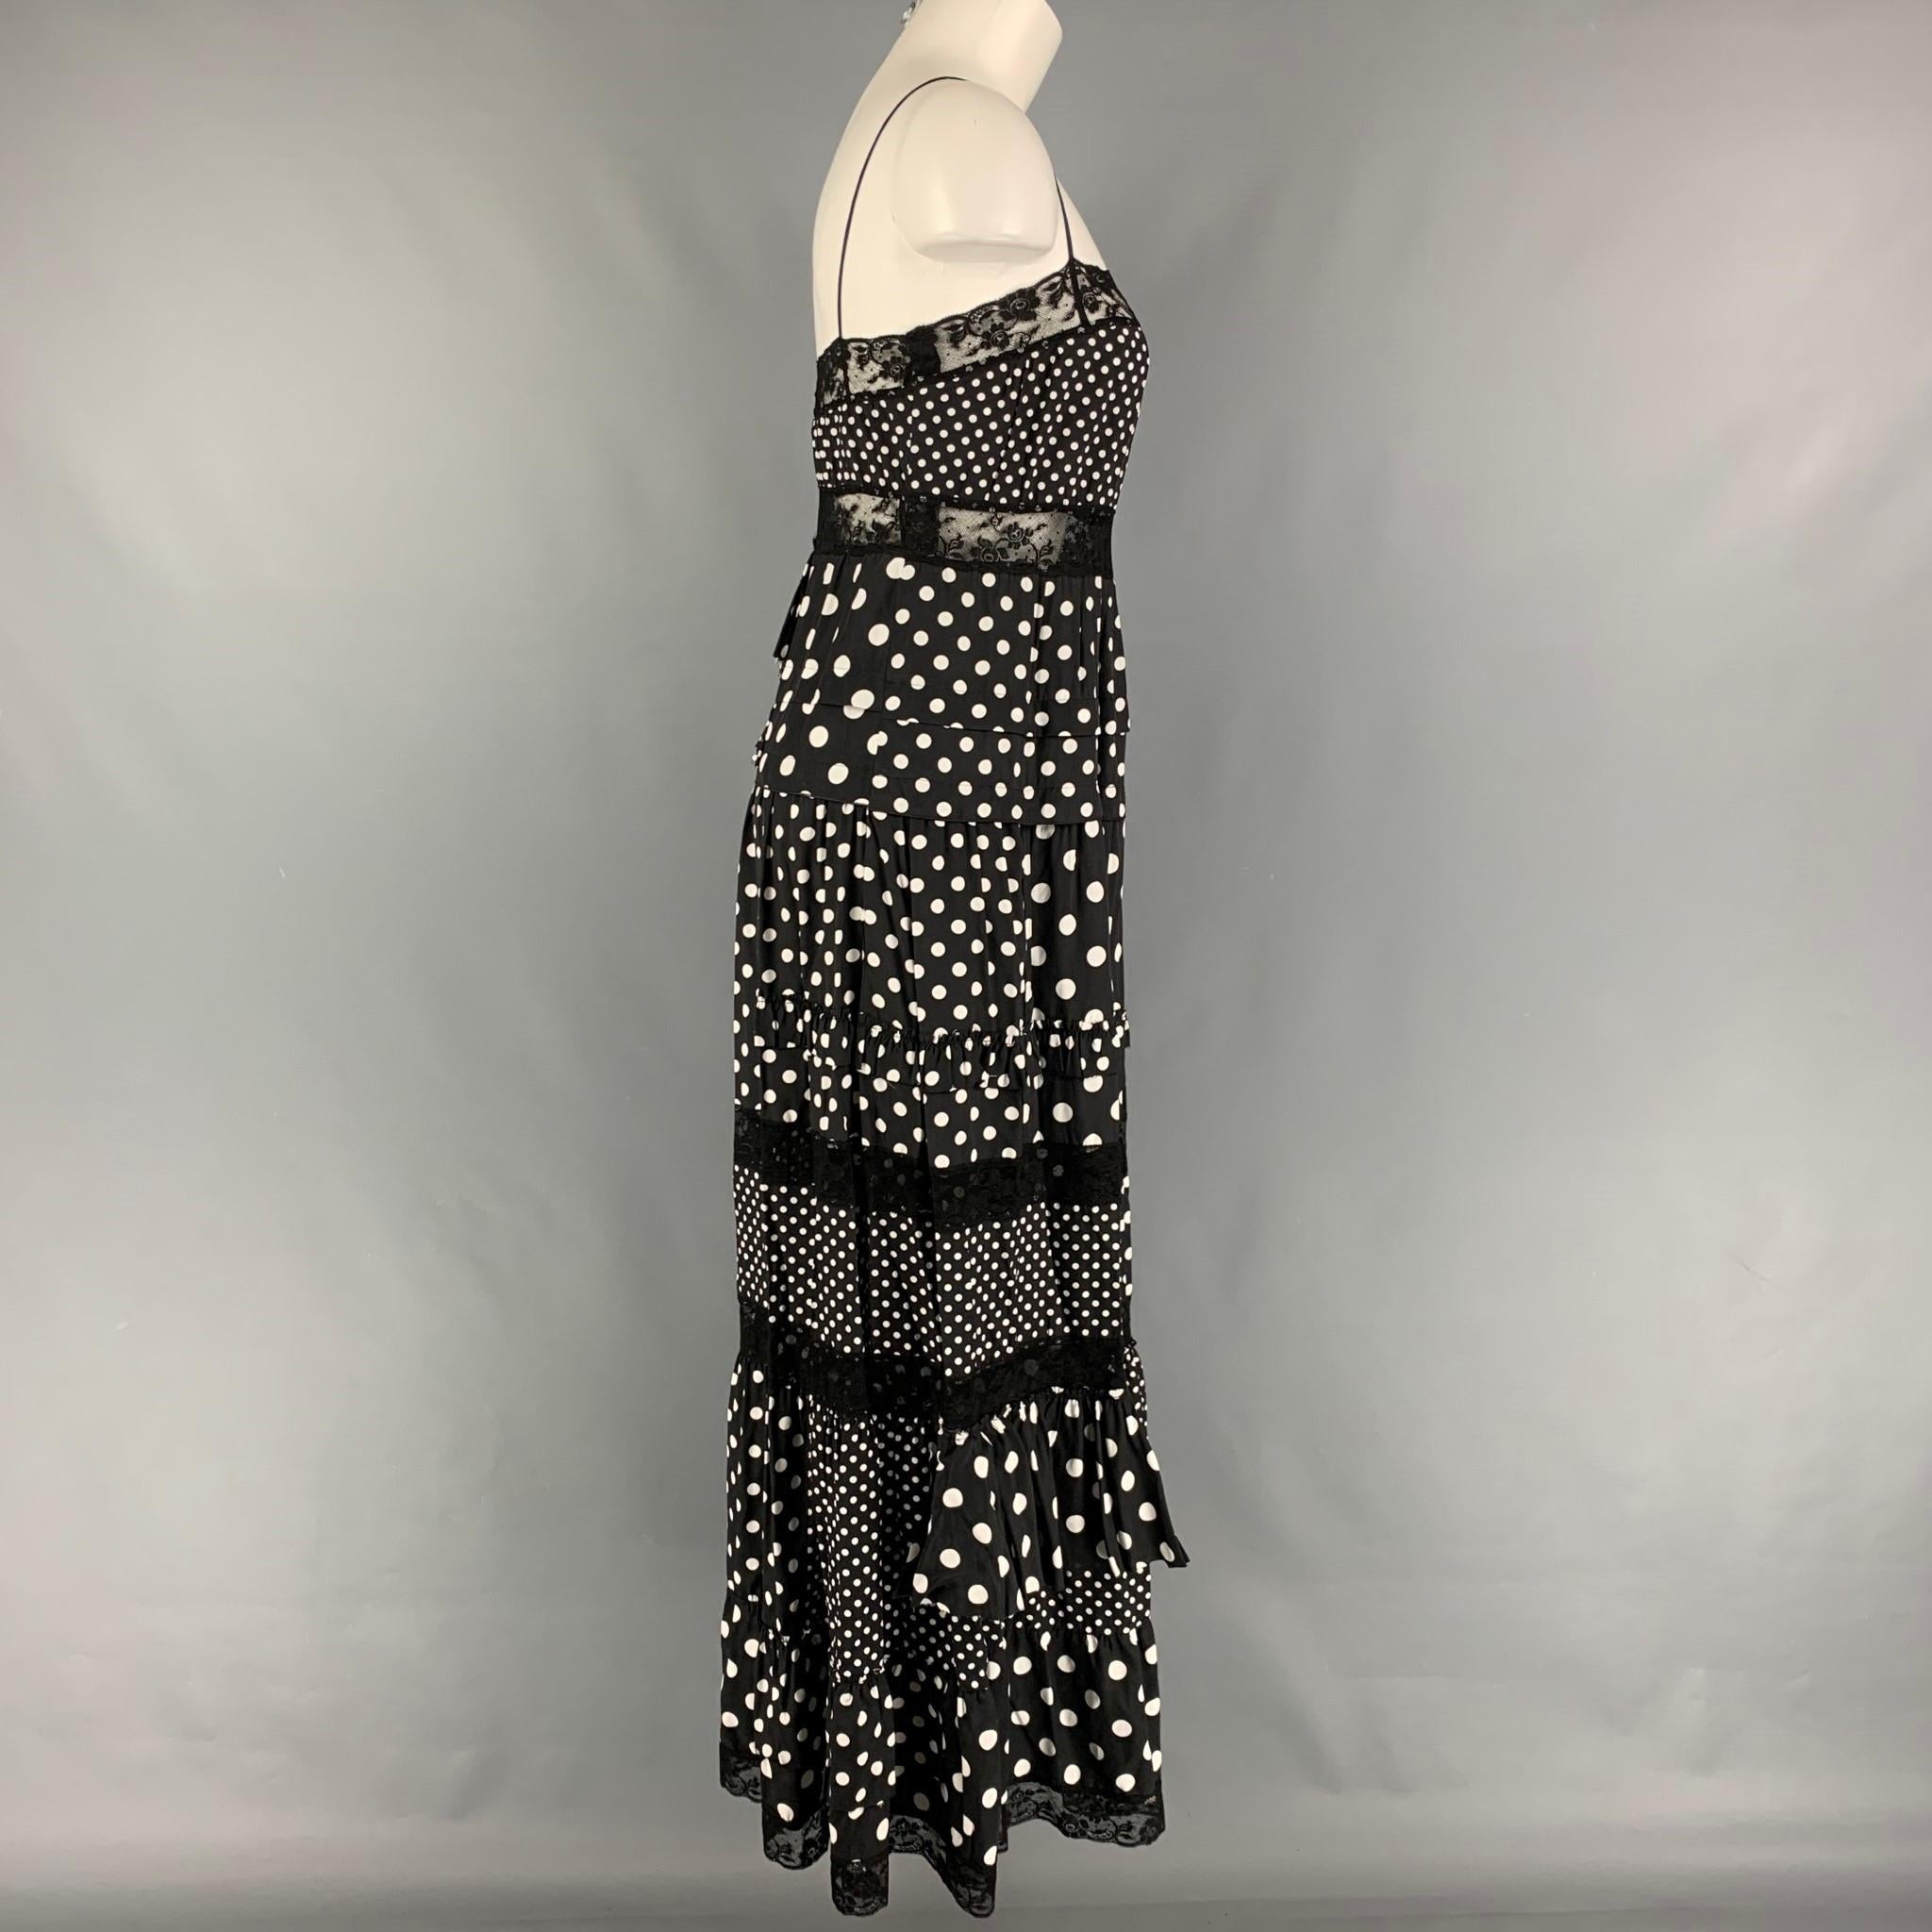 MARC by MARC JACOBS dress comes in a black & white polka dot viscose featuring a ruffled style, lace trim, and spaghetti straps. 

Very Good Pre-Owned Condition.
Marked: 2

Measurements:

Bust: 30 in.
Waist: 30 in.
Hip: 40 in.
Length: 46 in. 